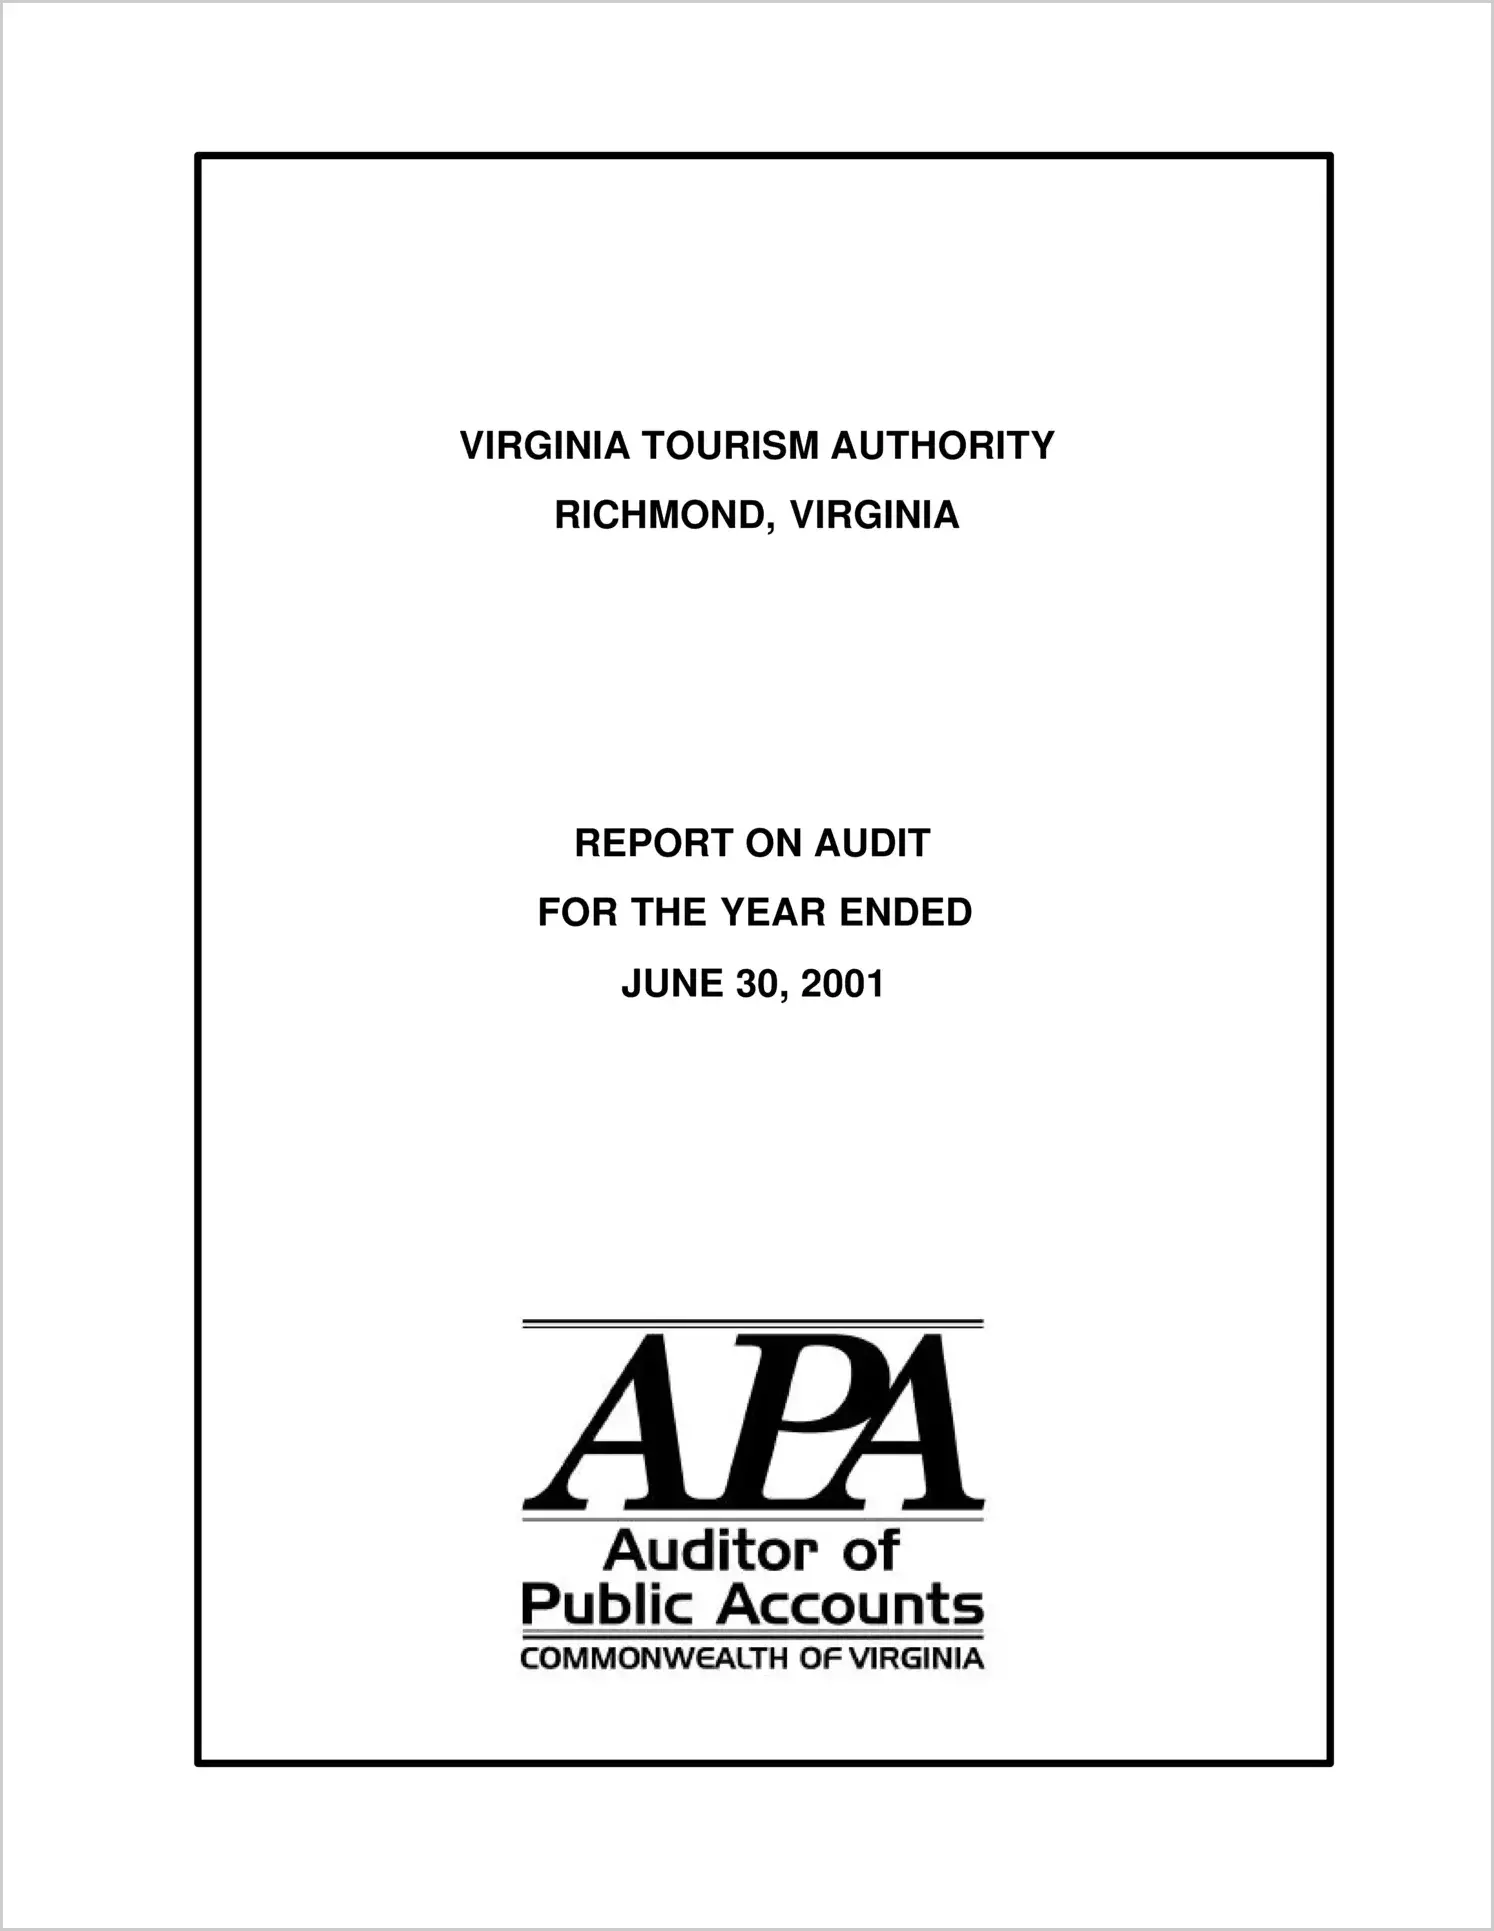 Virginia Tourism Authority for the year ended June 30, 2001